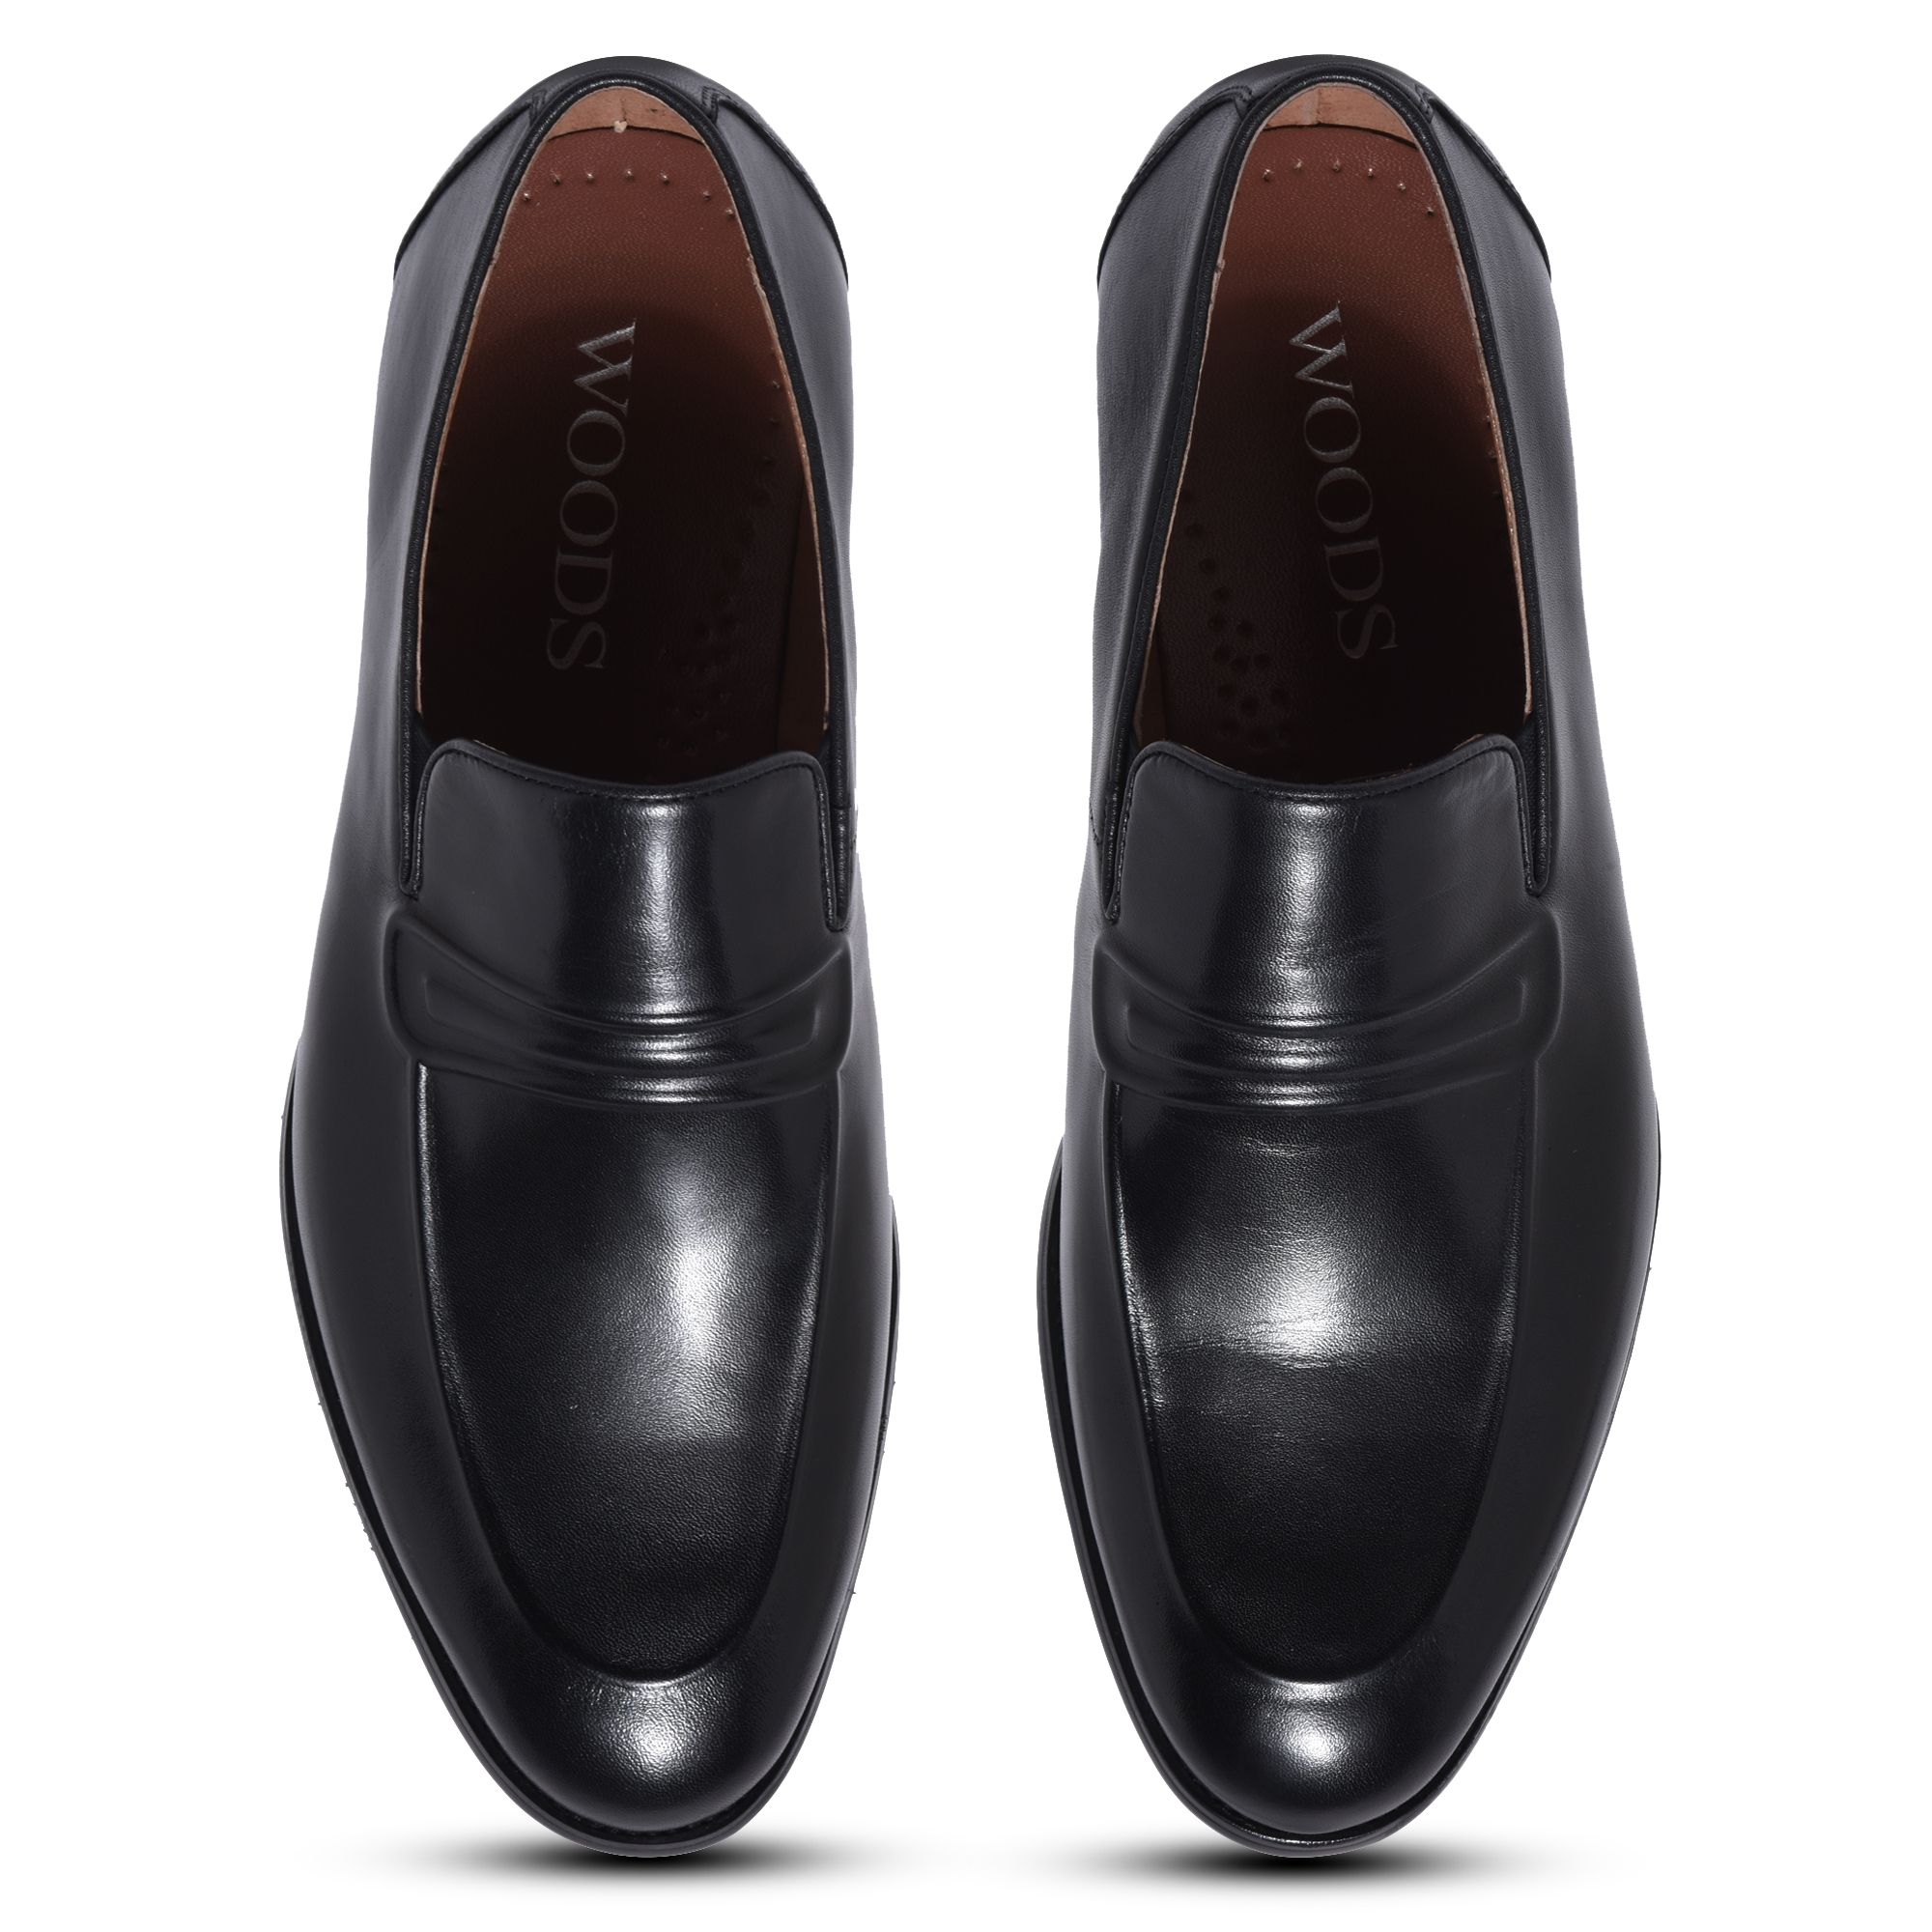 black loafer for men 7 197 mrp 11 995 40 % off prices include taxes ...